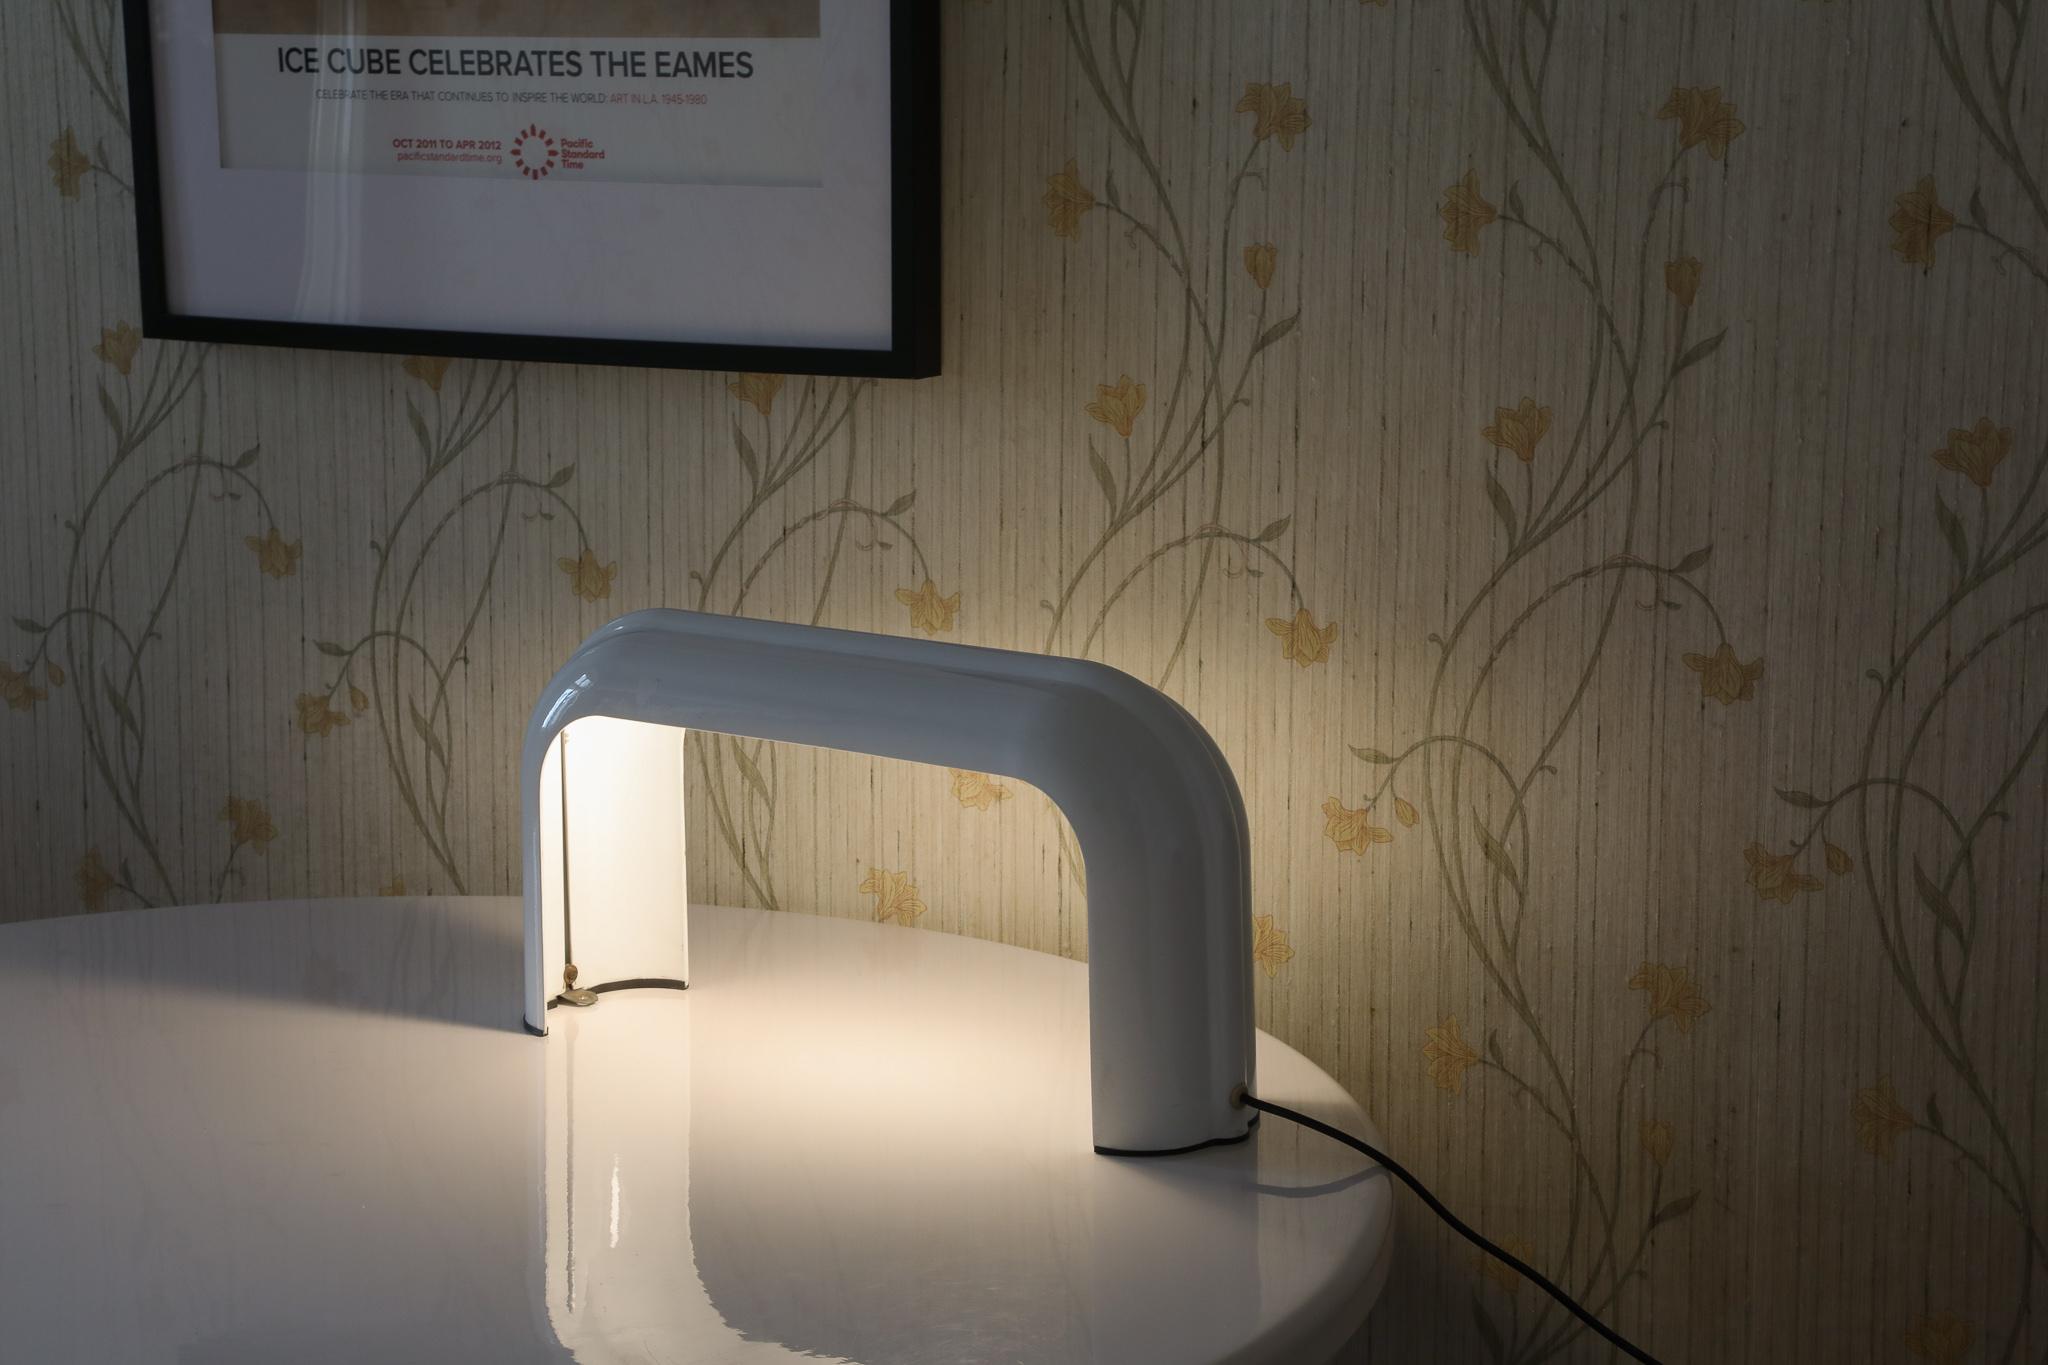 Table or Wall Lamp 